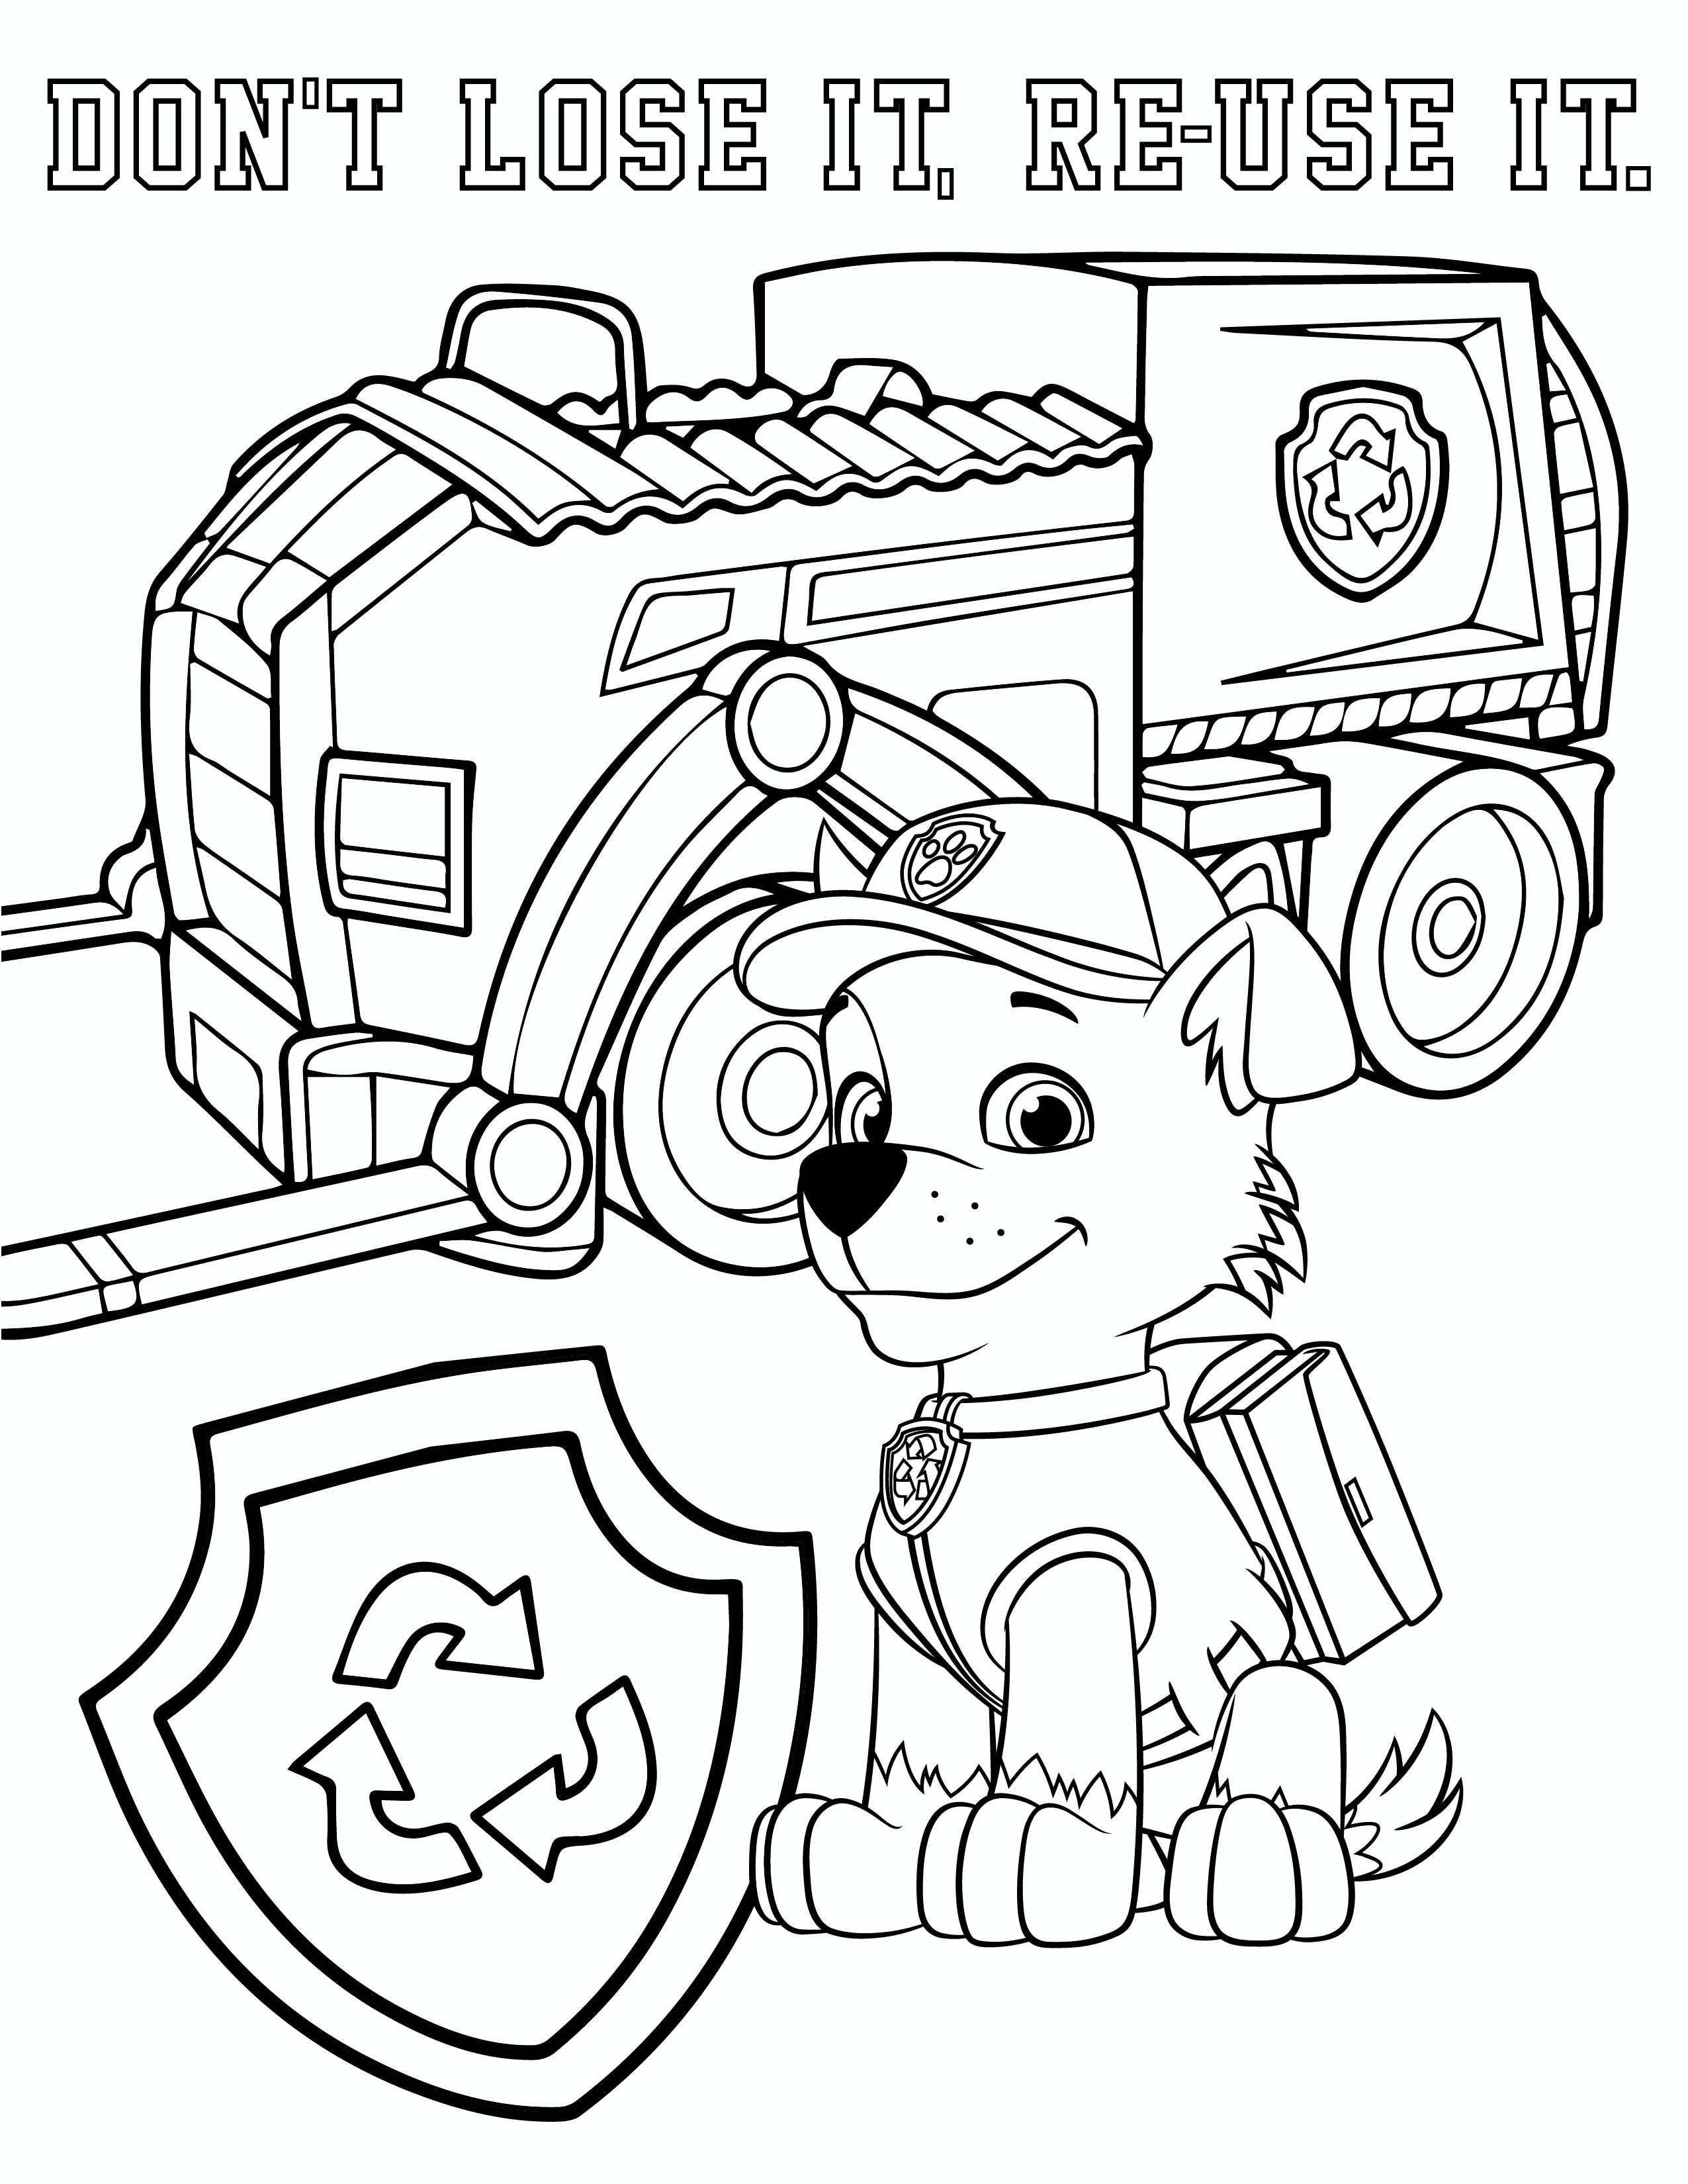 Paw patrol coloring pages â free printable coloring page